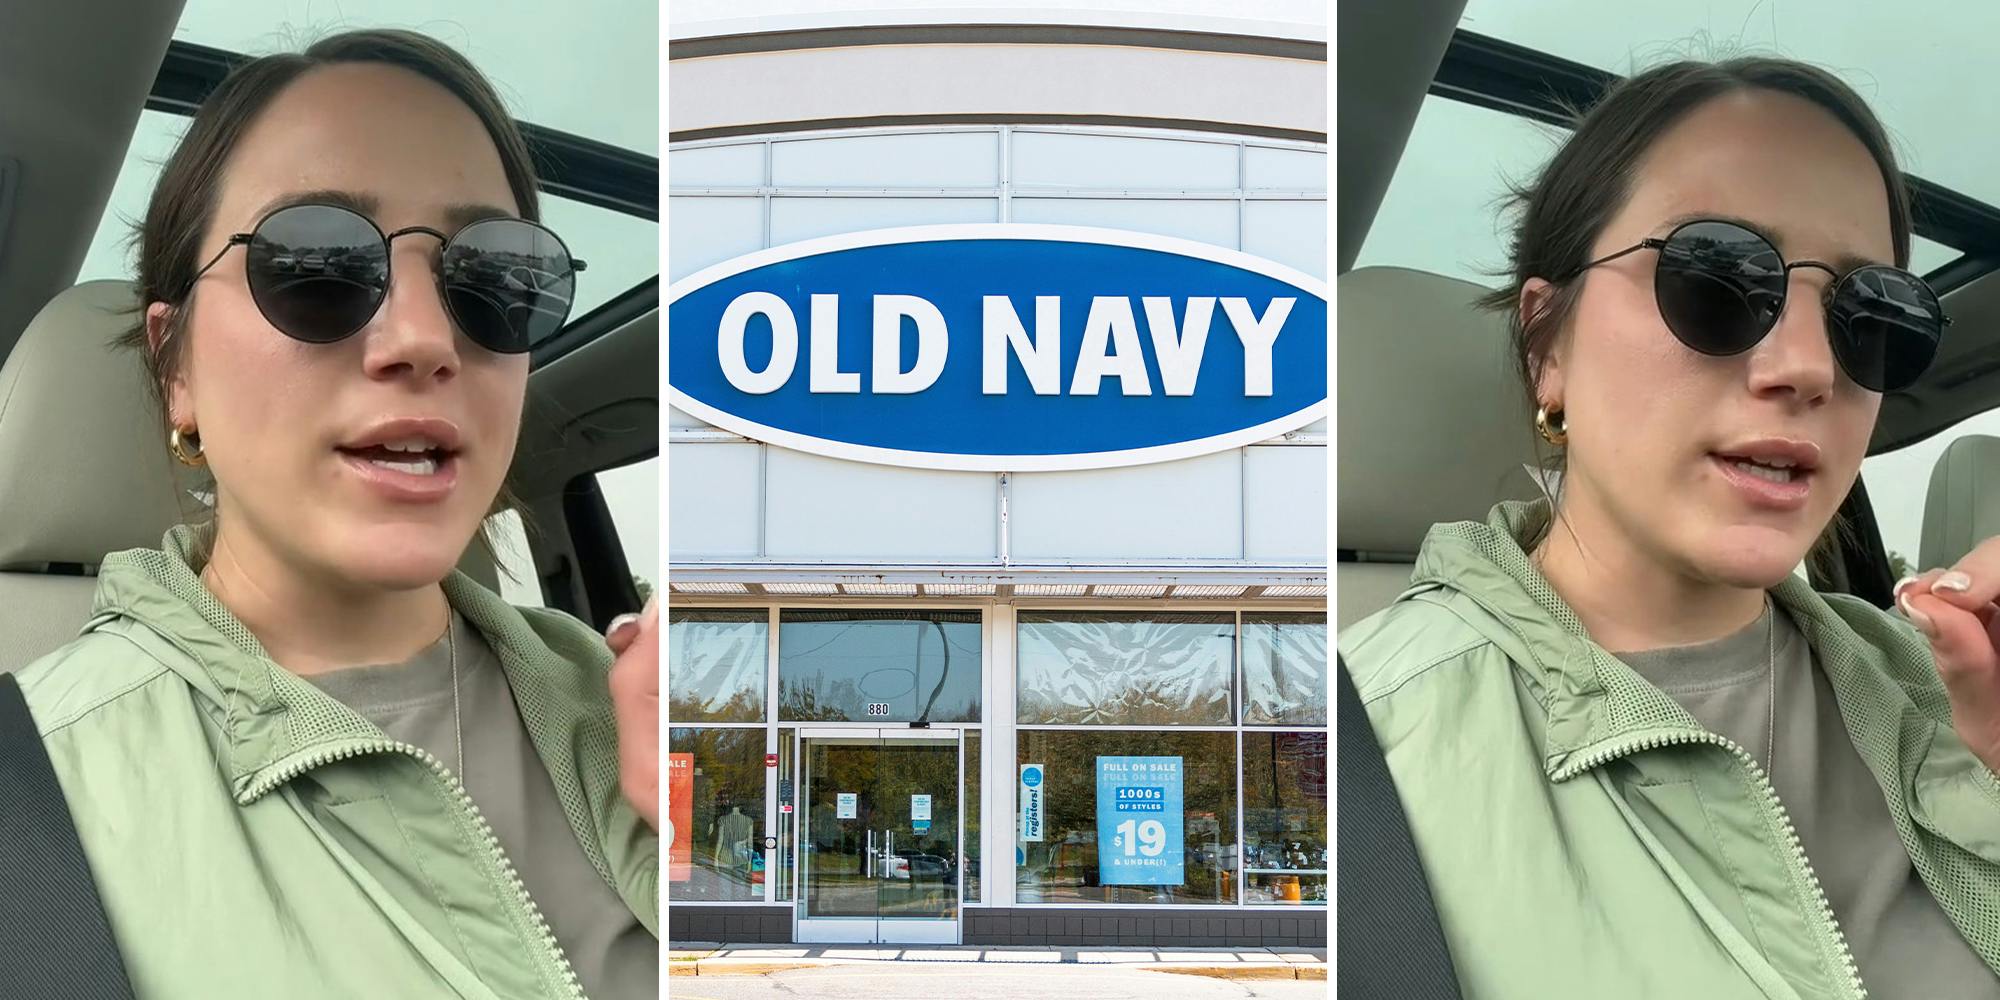 ‘I think I’ve been getting scammed’: Old Navy shopper visits store to take advantage of sale items. It backfires